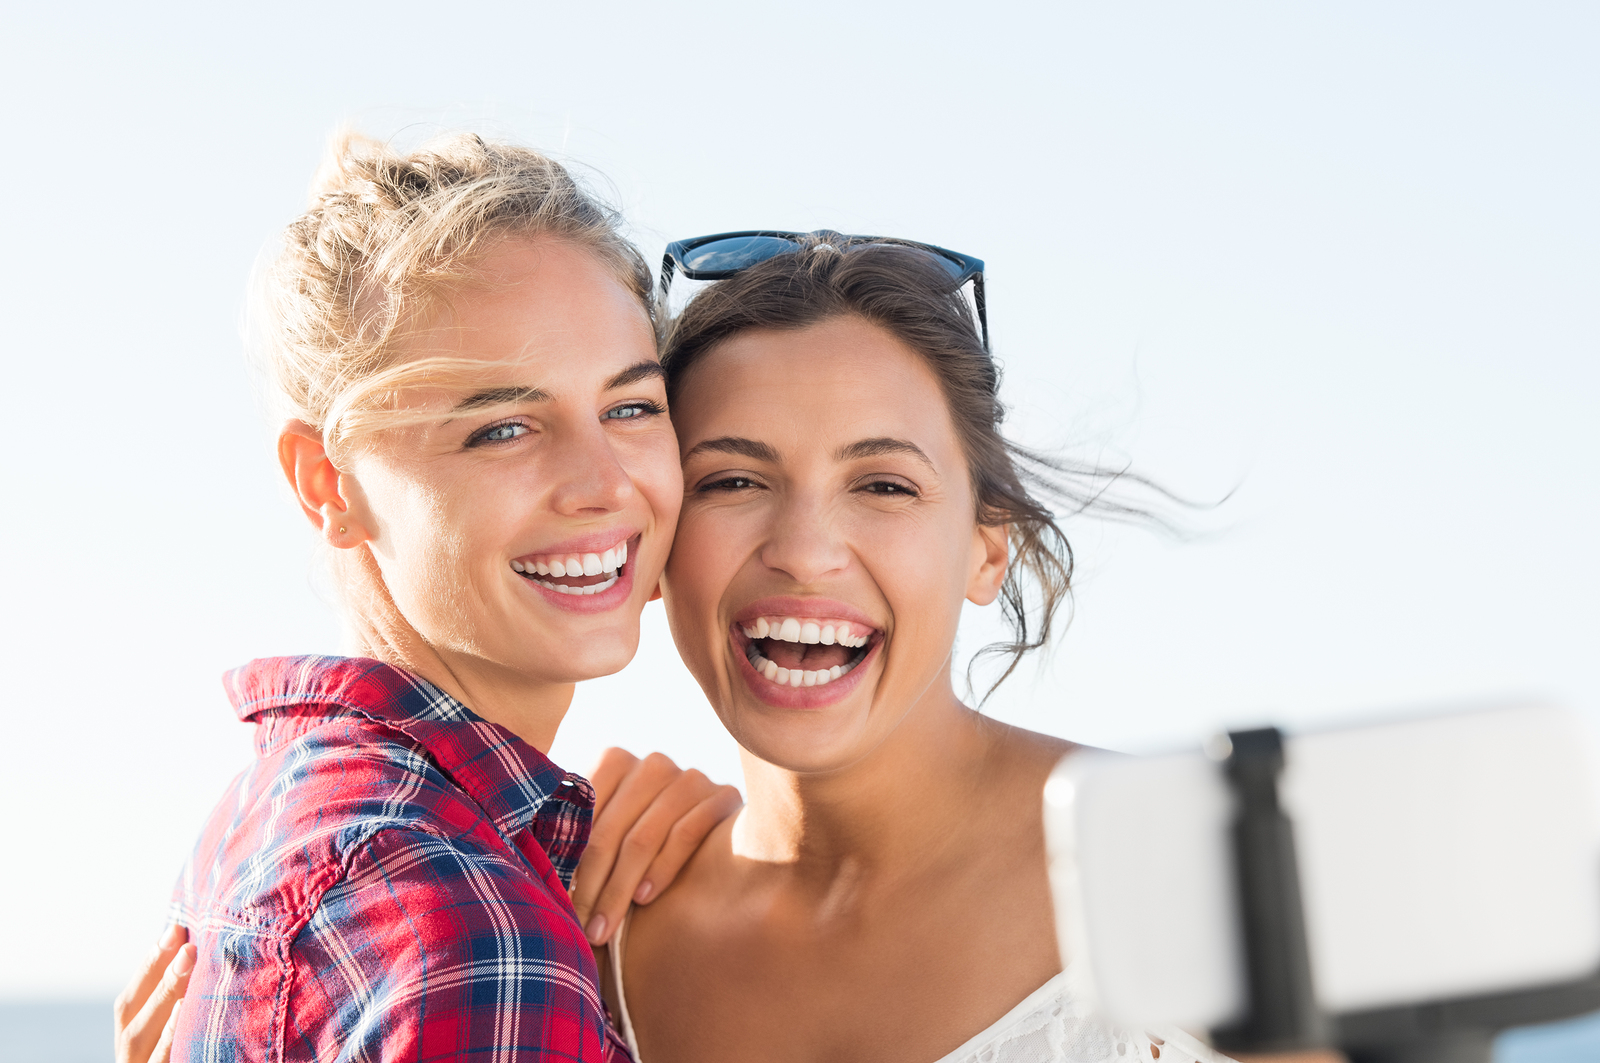 Get The Perfect Selfie Smile In No Time!